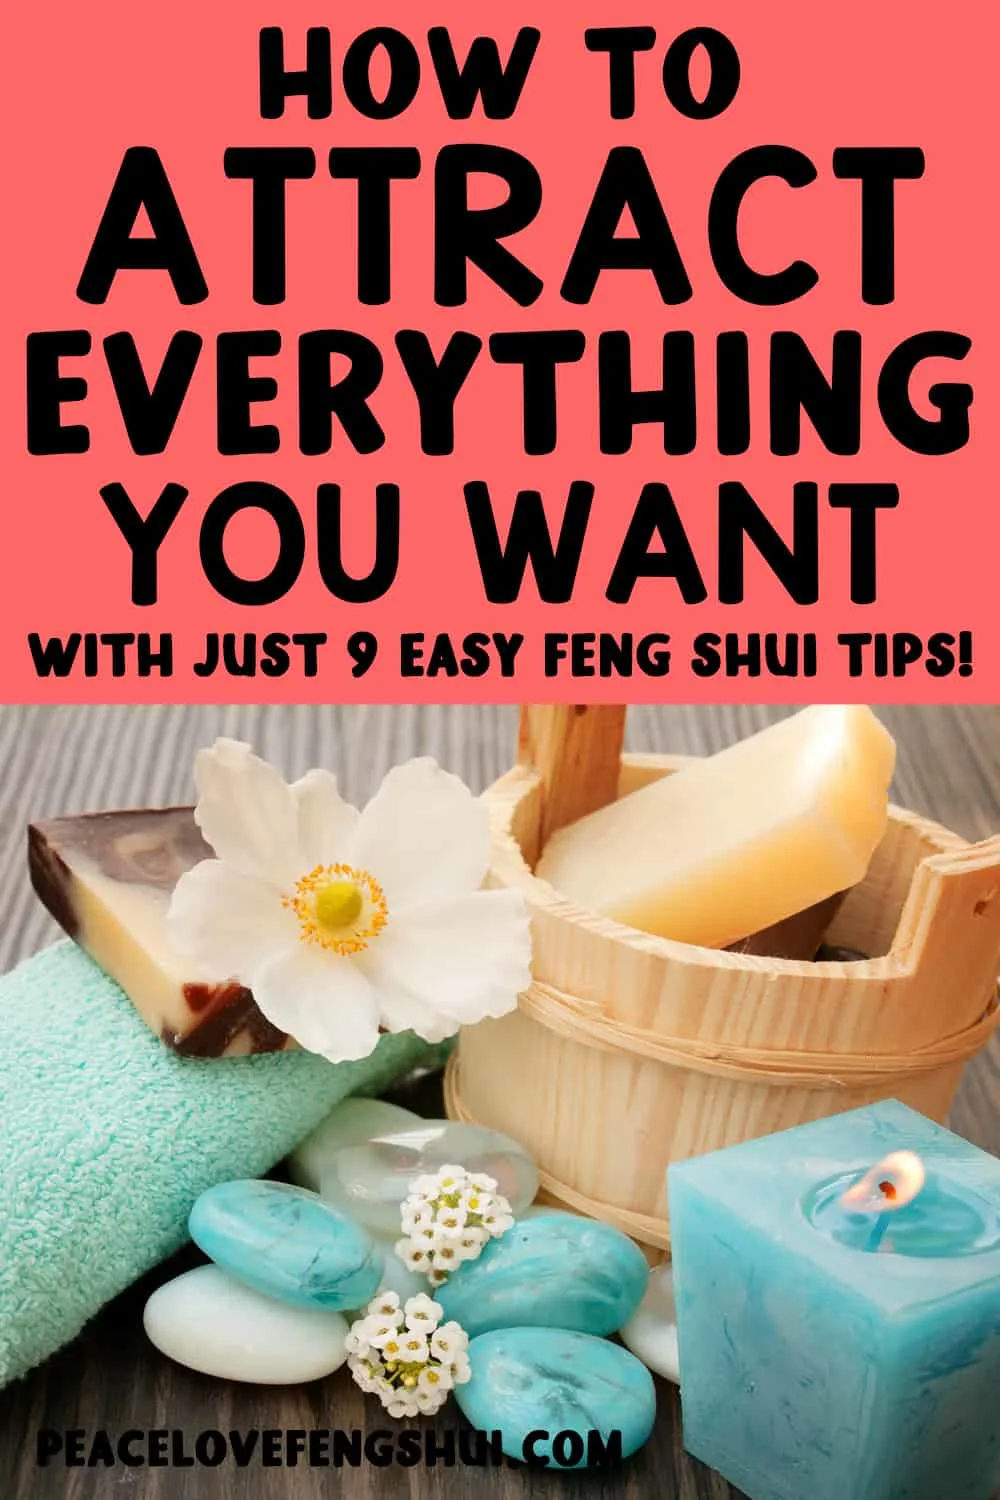 how to attract everything you want with just 9 easy feng shui tips